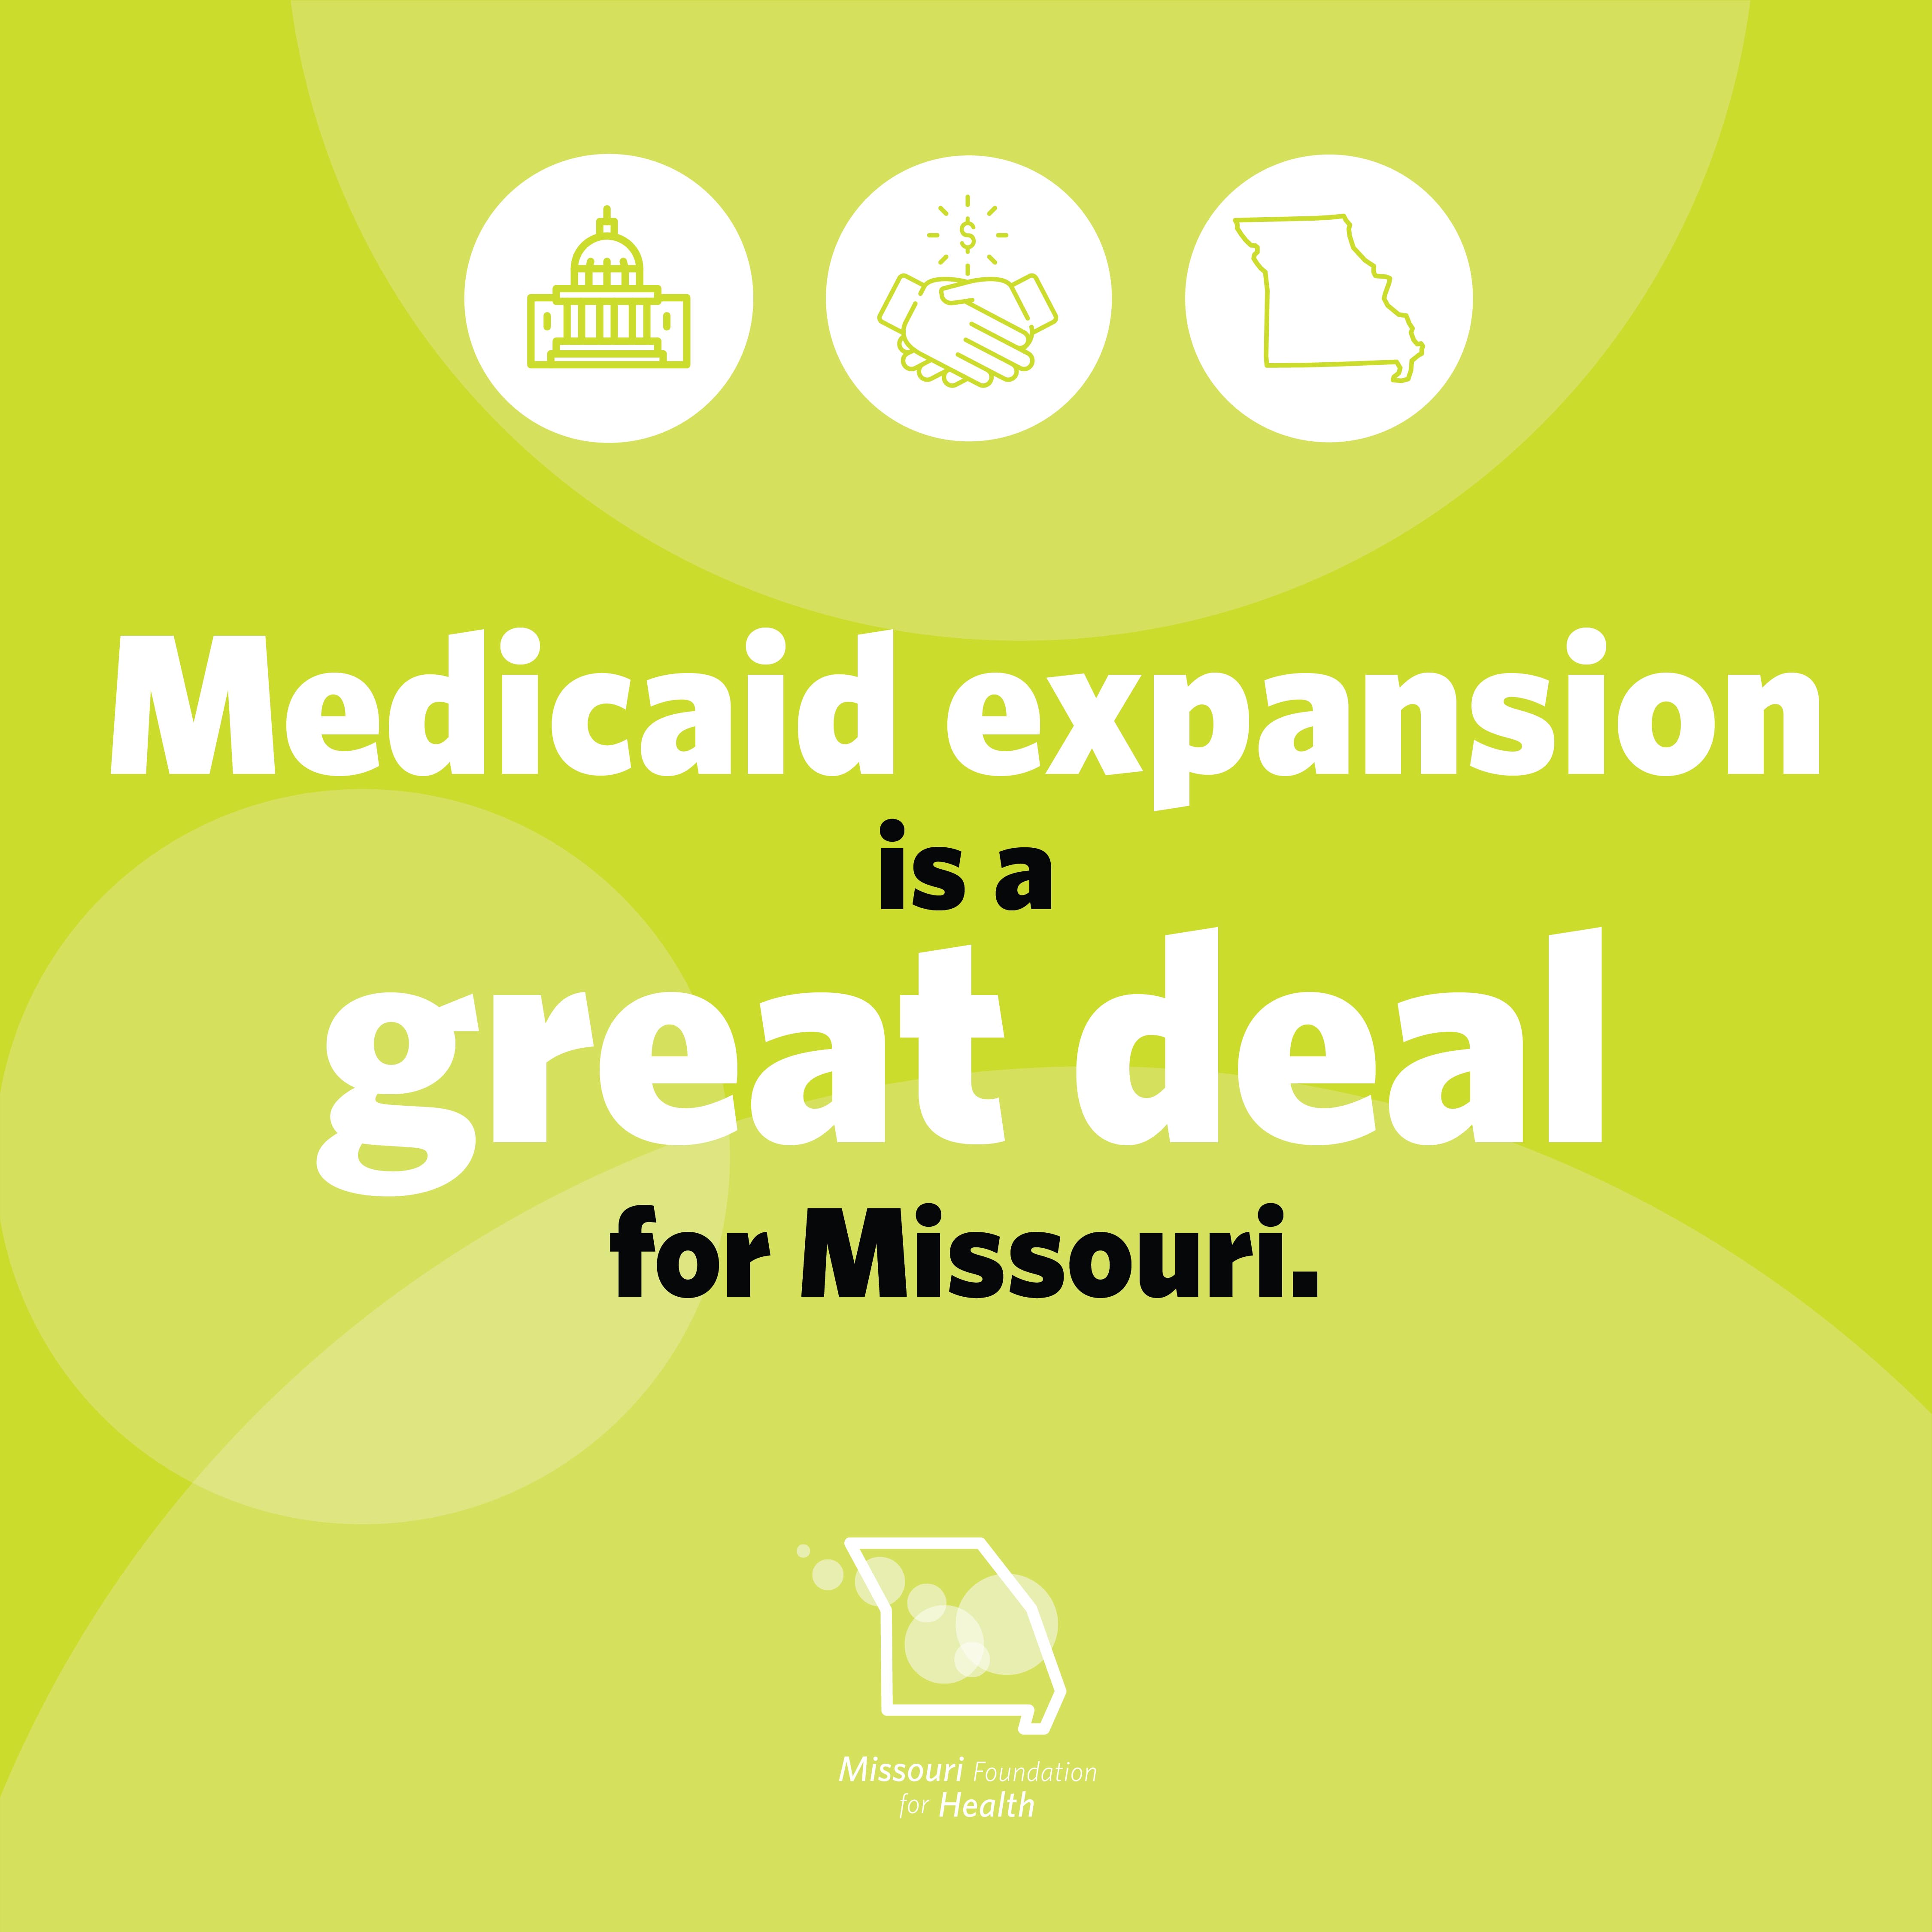 Graphic with icons of a capital, hands shaking, and Missouri state and text below that states Medicaid expansion is a great deal for Missouri. with the Missouri Foundation for Health logo.